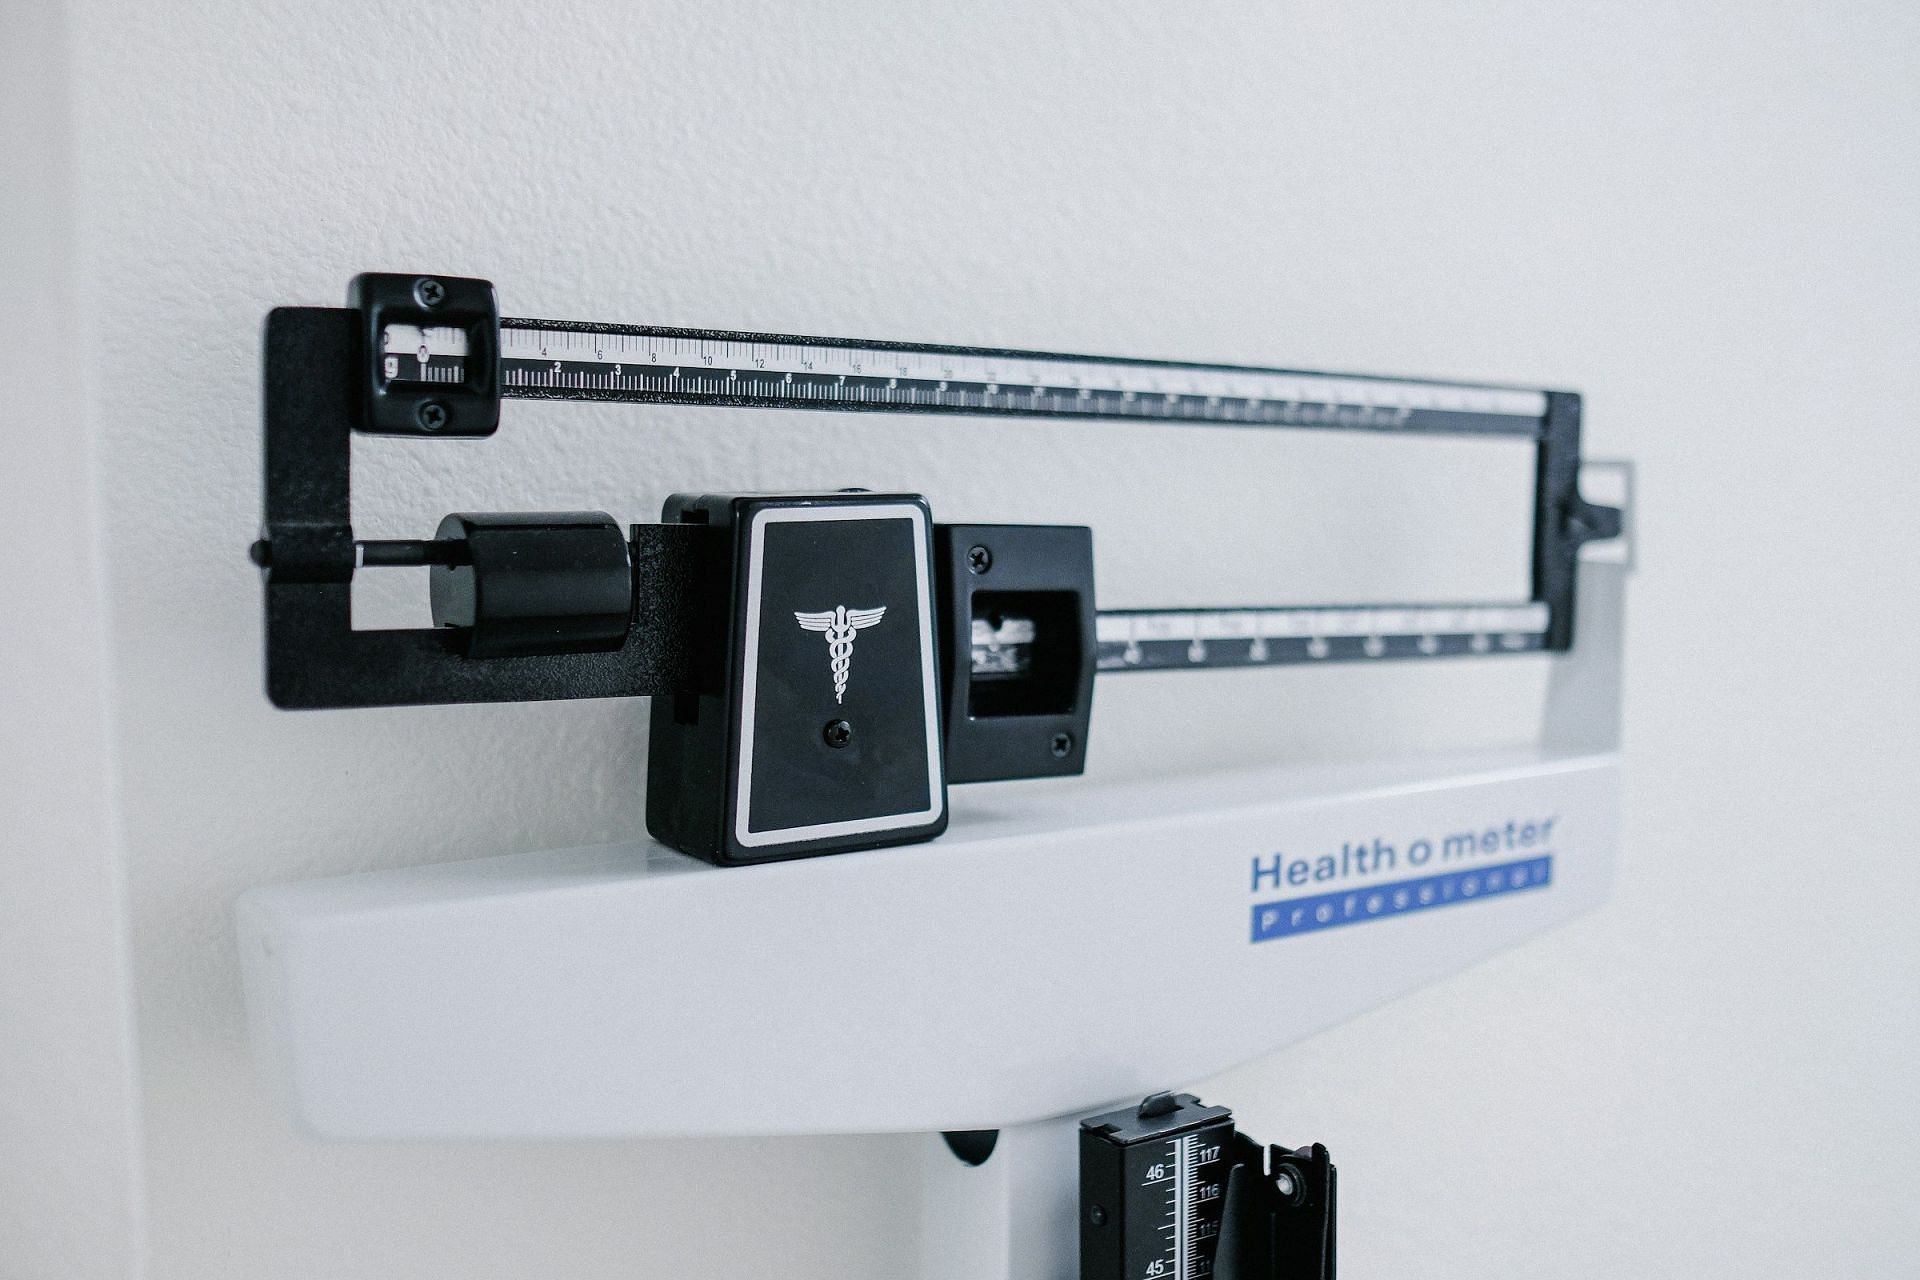 Obesity vs overweight: A healthometer to calculate BMI (Image by Kenny Eliason/Unsplash)